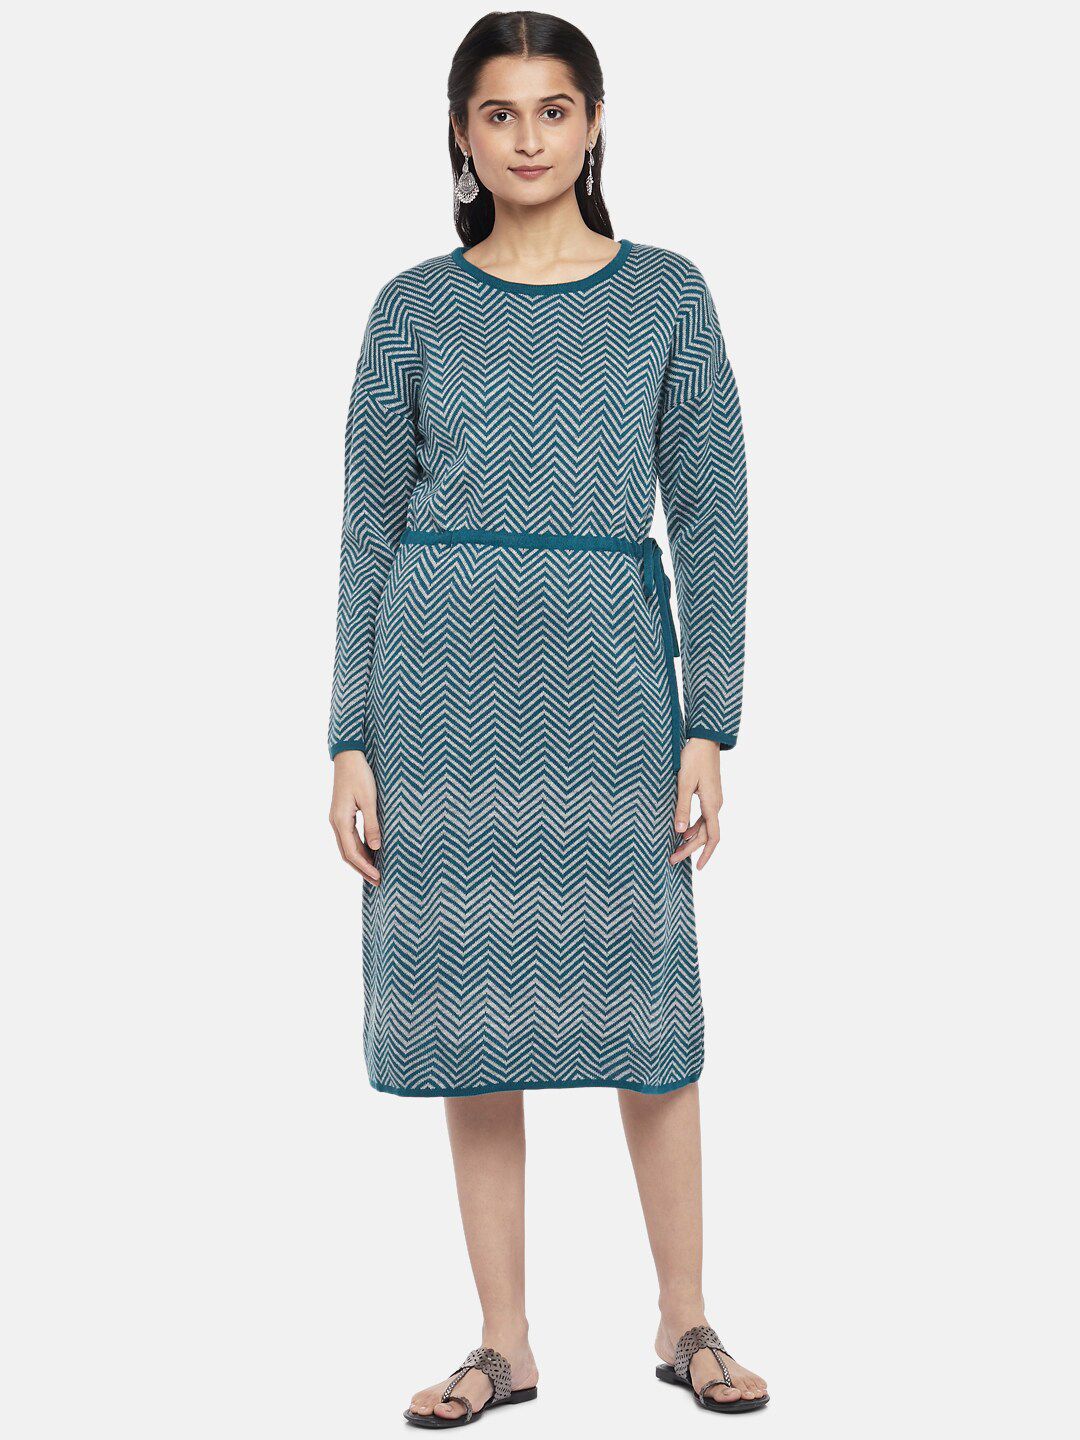 AKKRITI BY PANTALOONS Turquoise Blue Acrylic Chevron Sweater Dress With Belt Price in India